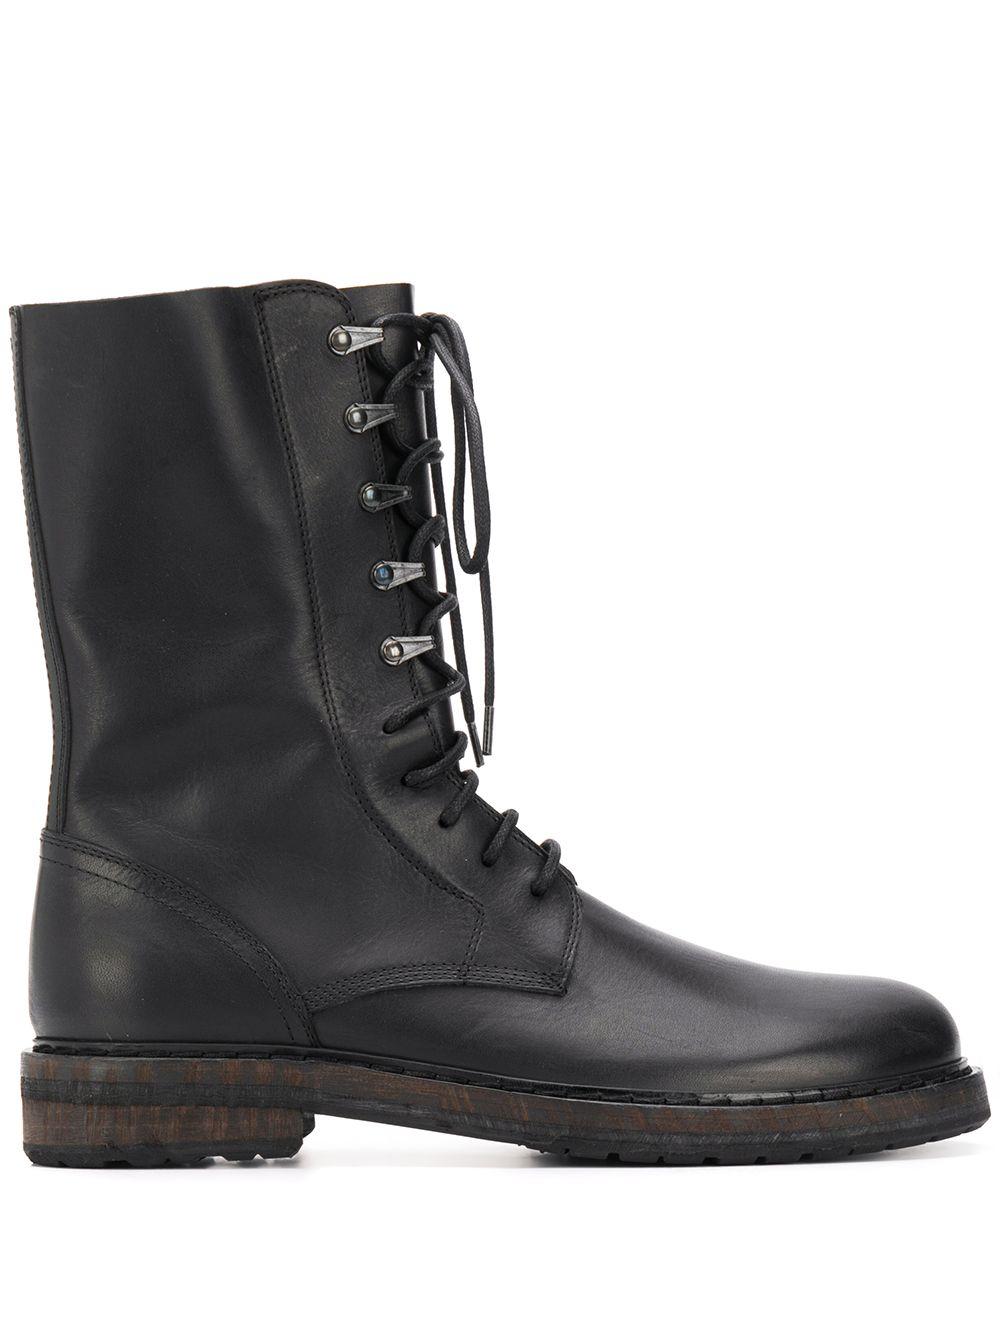 Ann Demeulemeester Leather Calf-length Boots in Black for Men - Save 10 ...